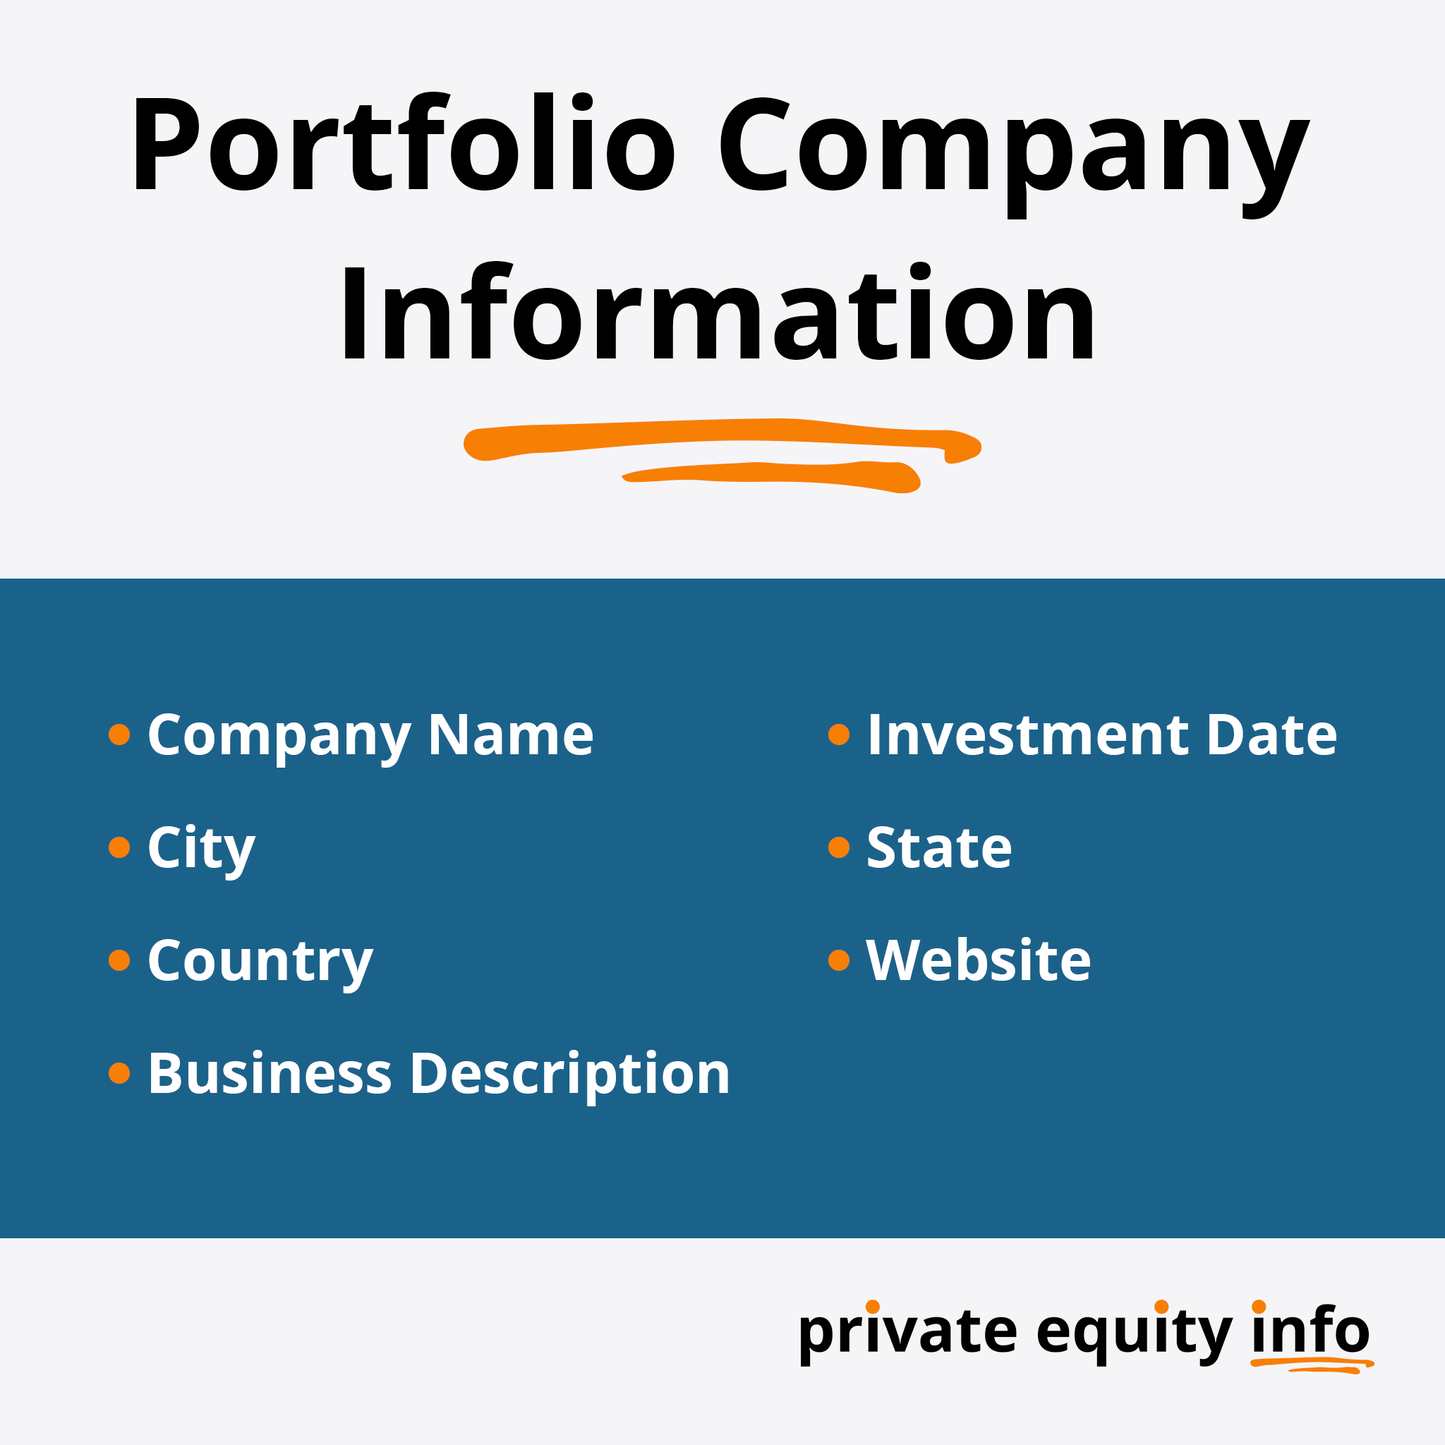 Private Equity and Asset Management Software 2023